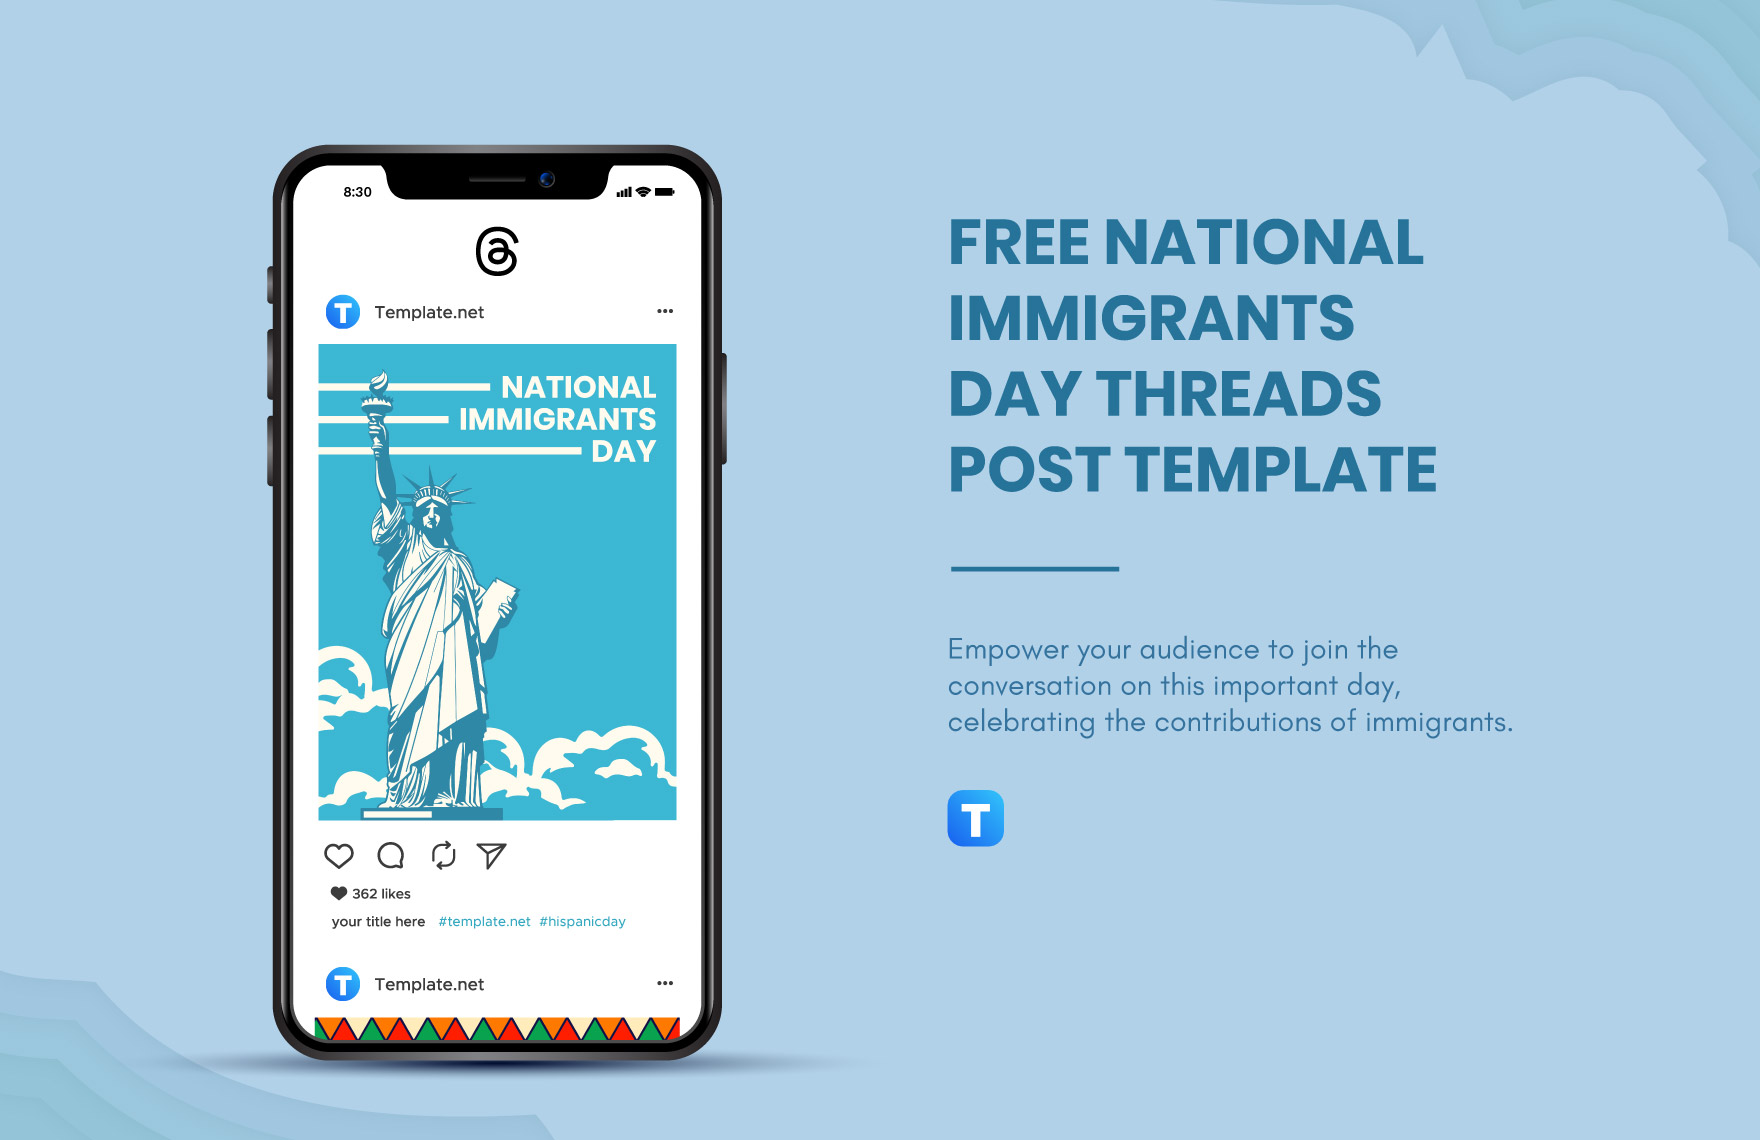 National Immigrants Day Threads Post